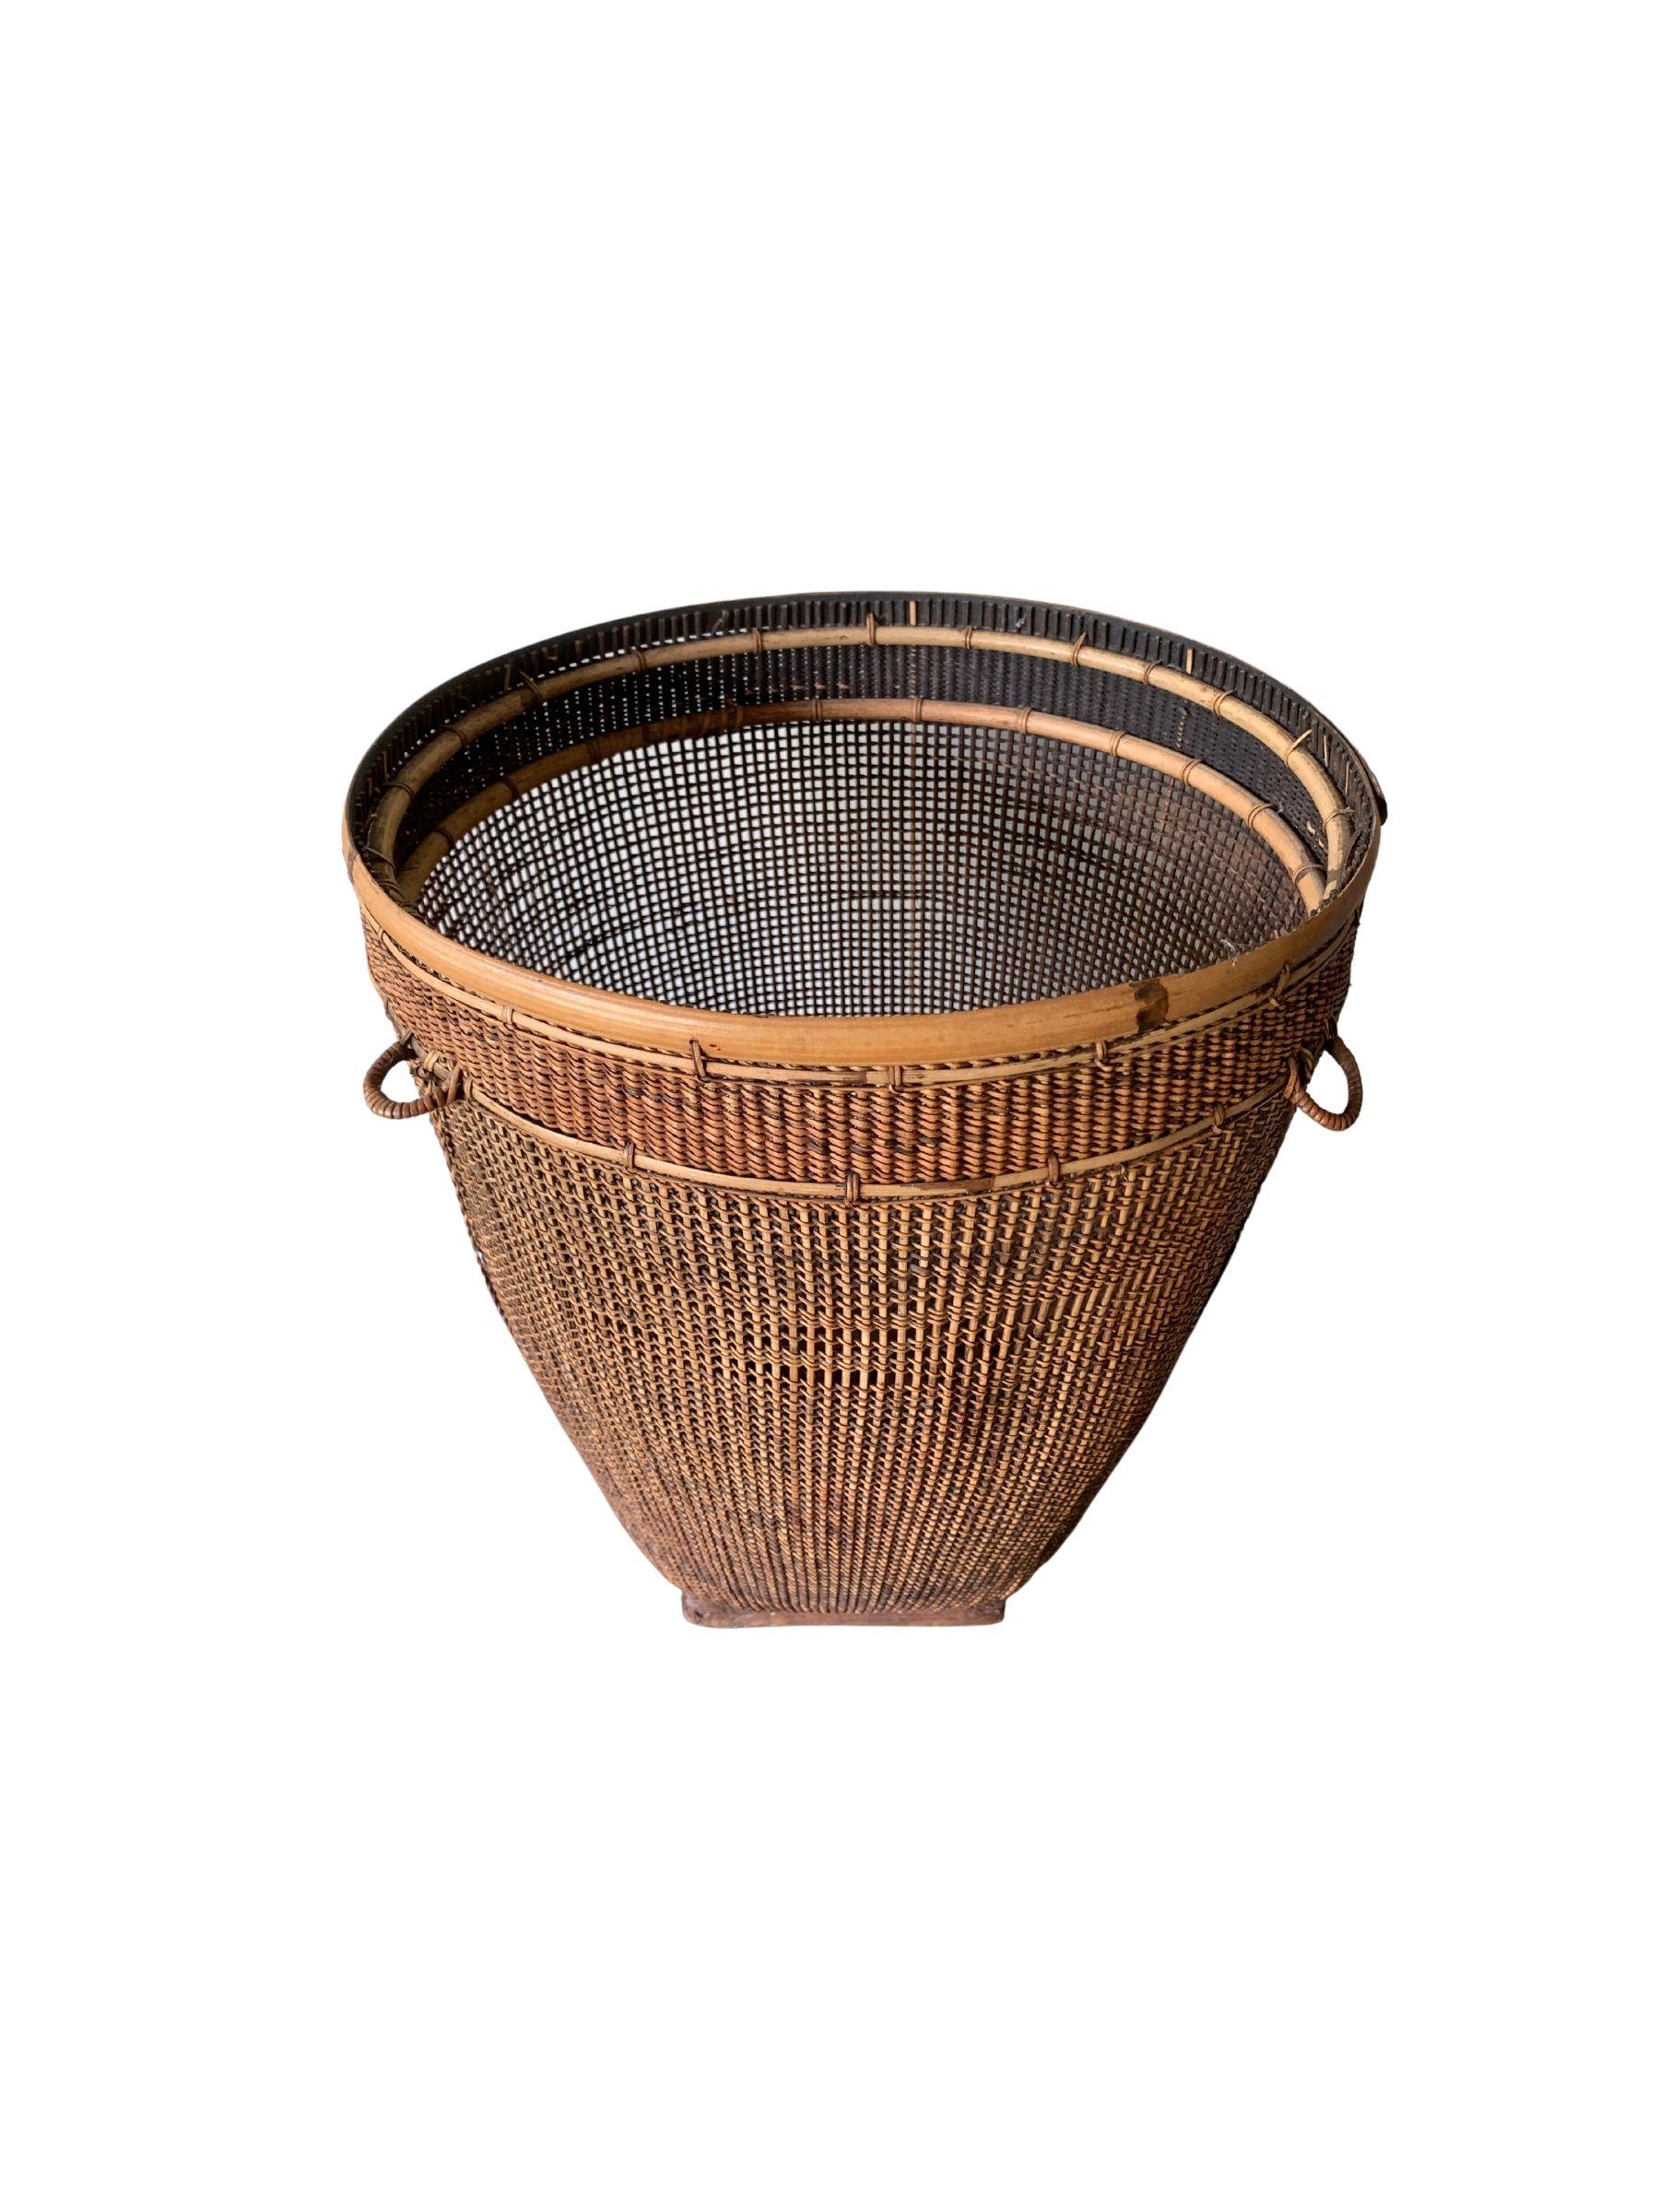 20th Century Bamboo & Rattan Basket from Dayak Tribe, Hand-Crafted Borneo, Indonesia, c. 1950 For Sale